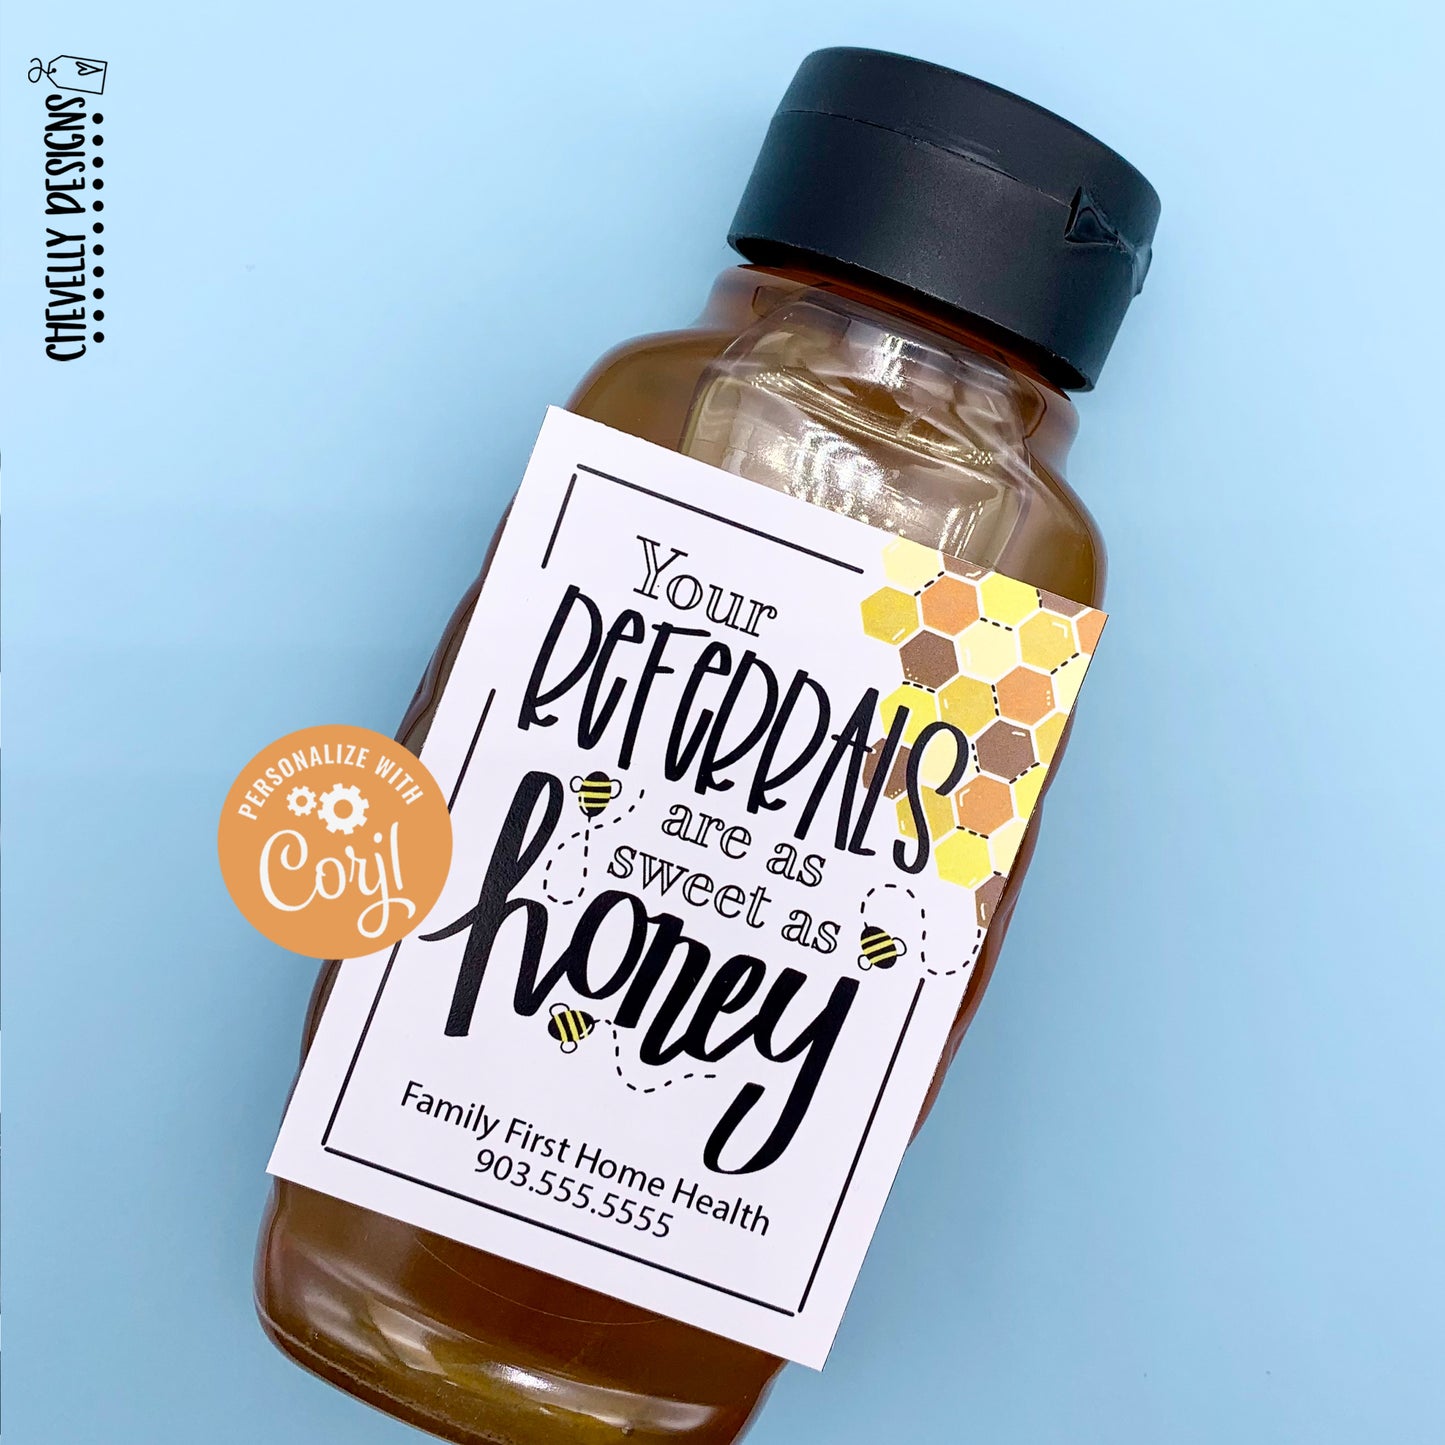 Editable - Your Referrals are as Sweet as Honey - Gift Tags for Business Marketing - Printable Digital File